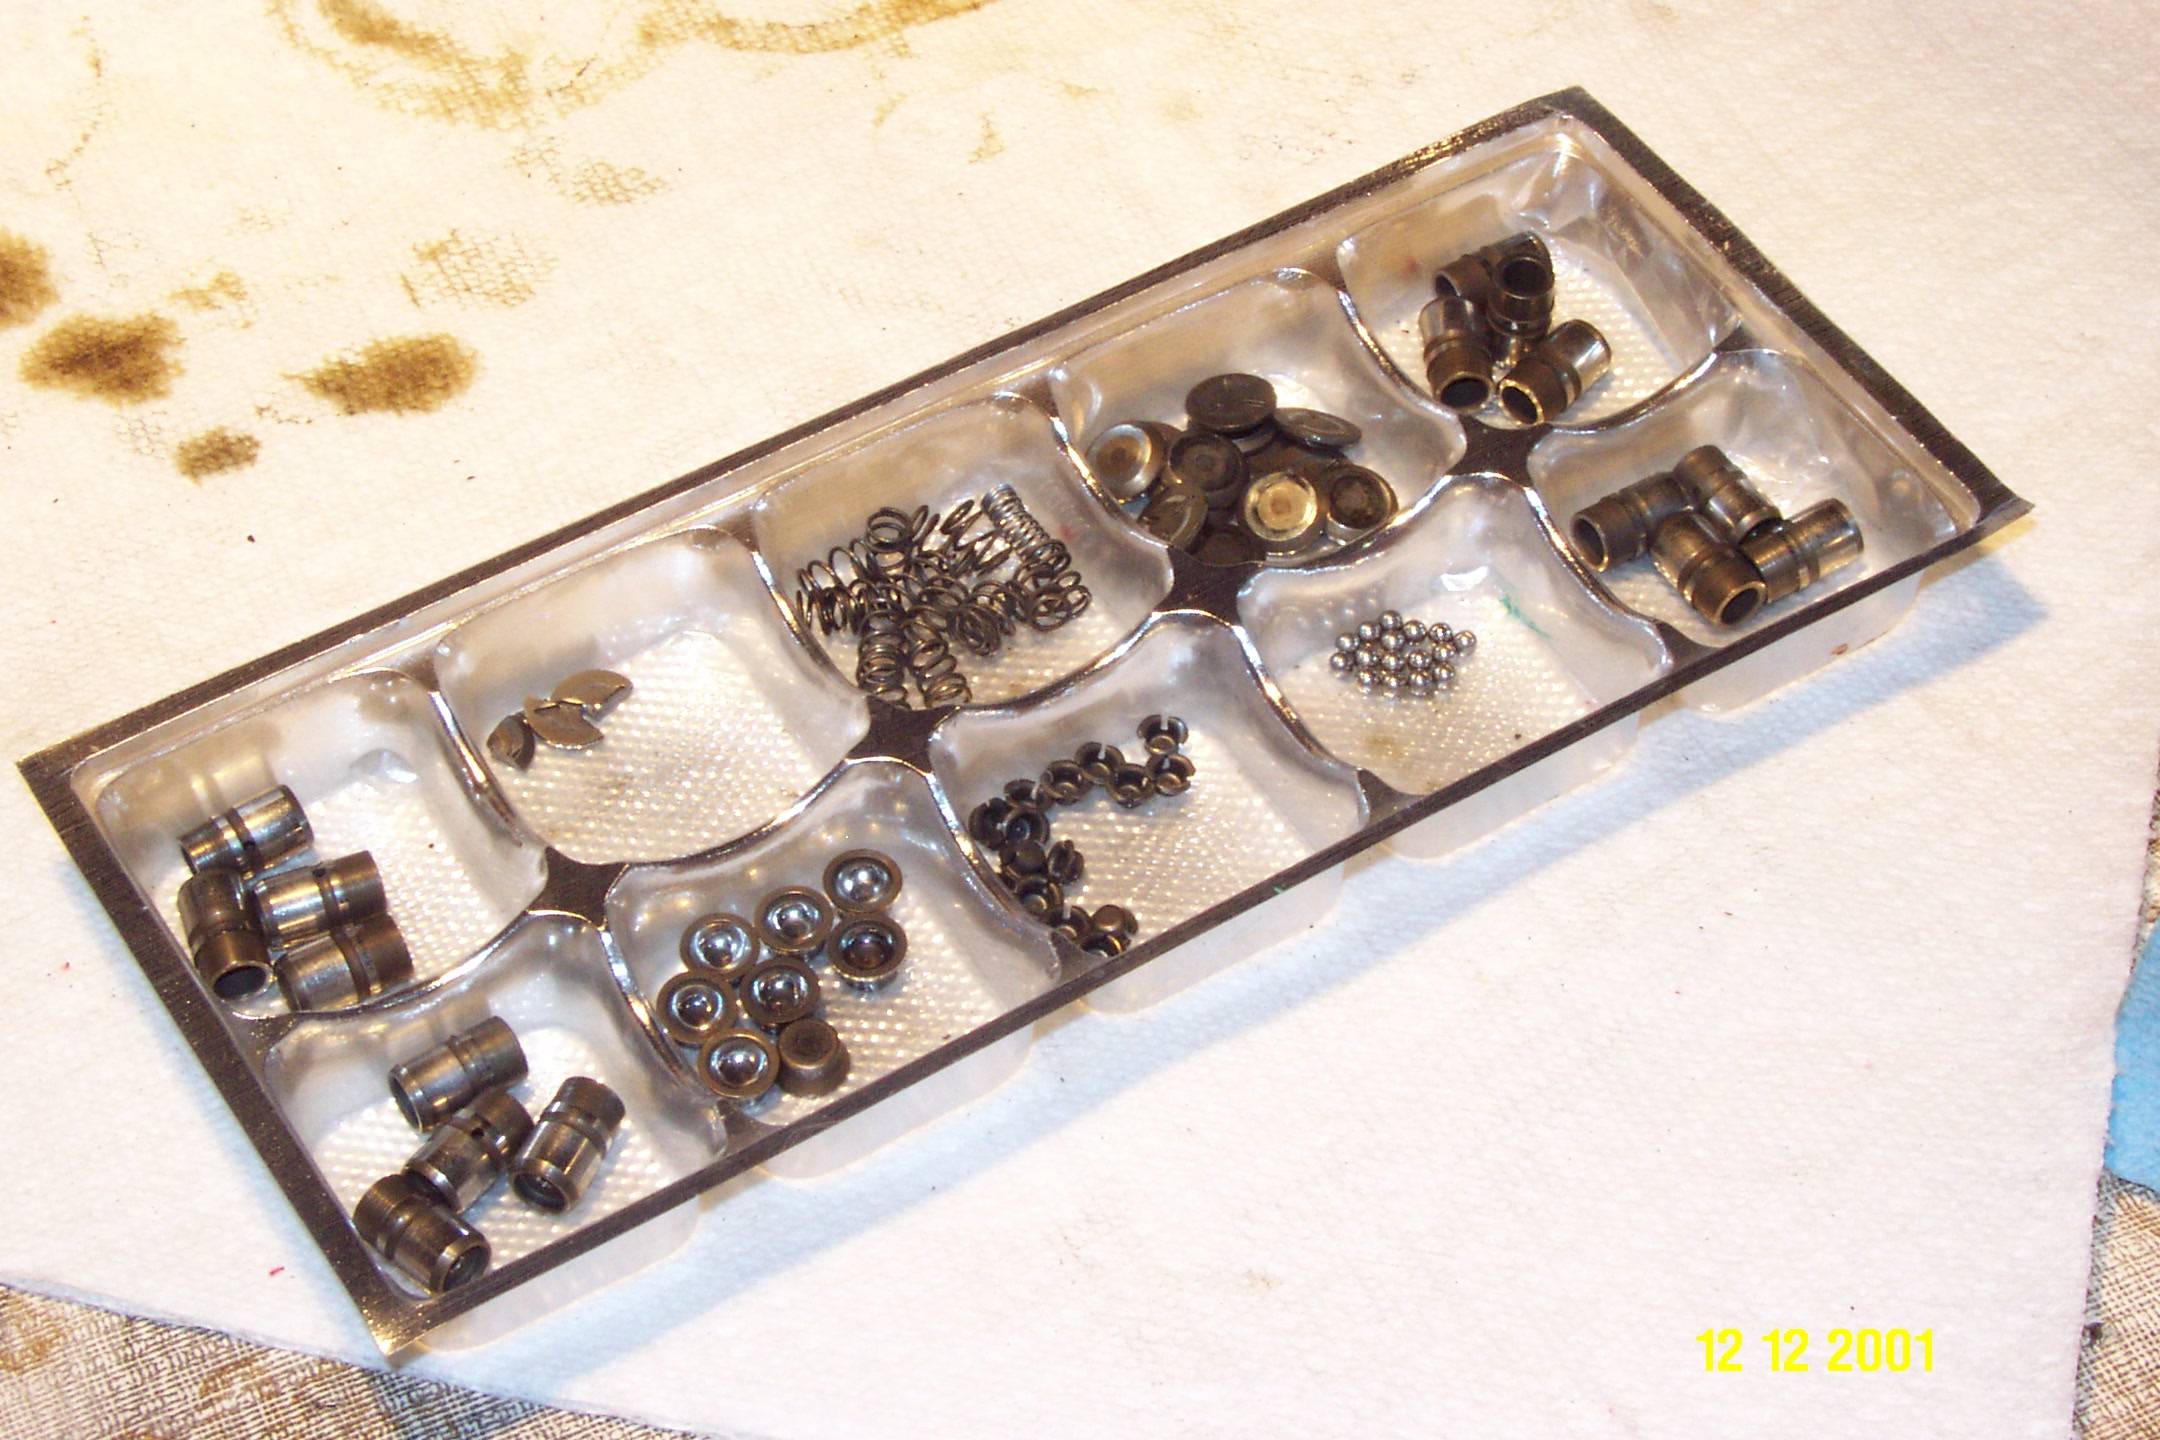 Lifter Parts in Tray